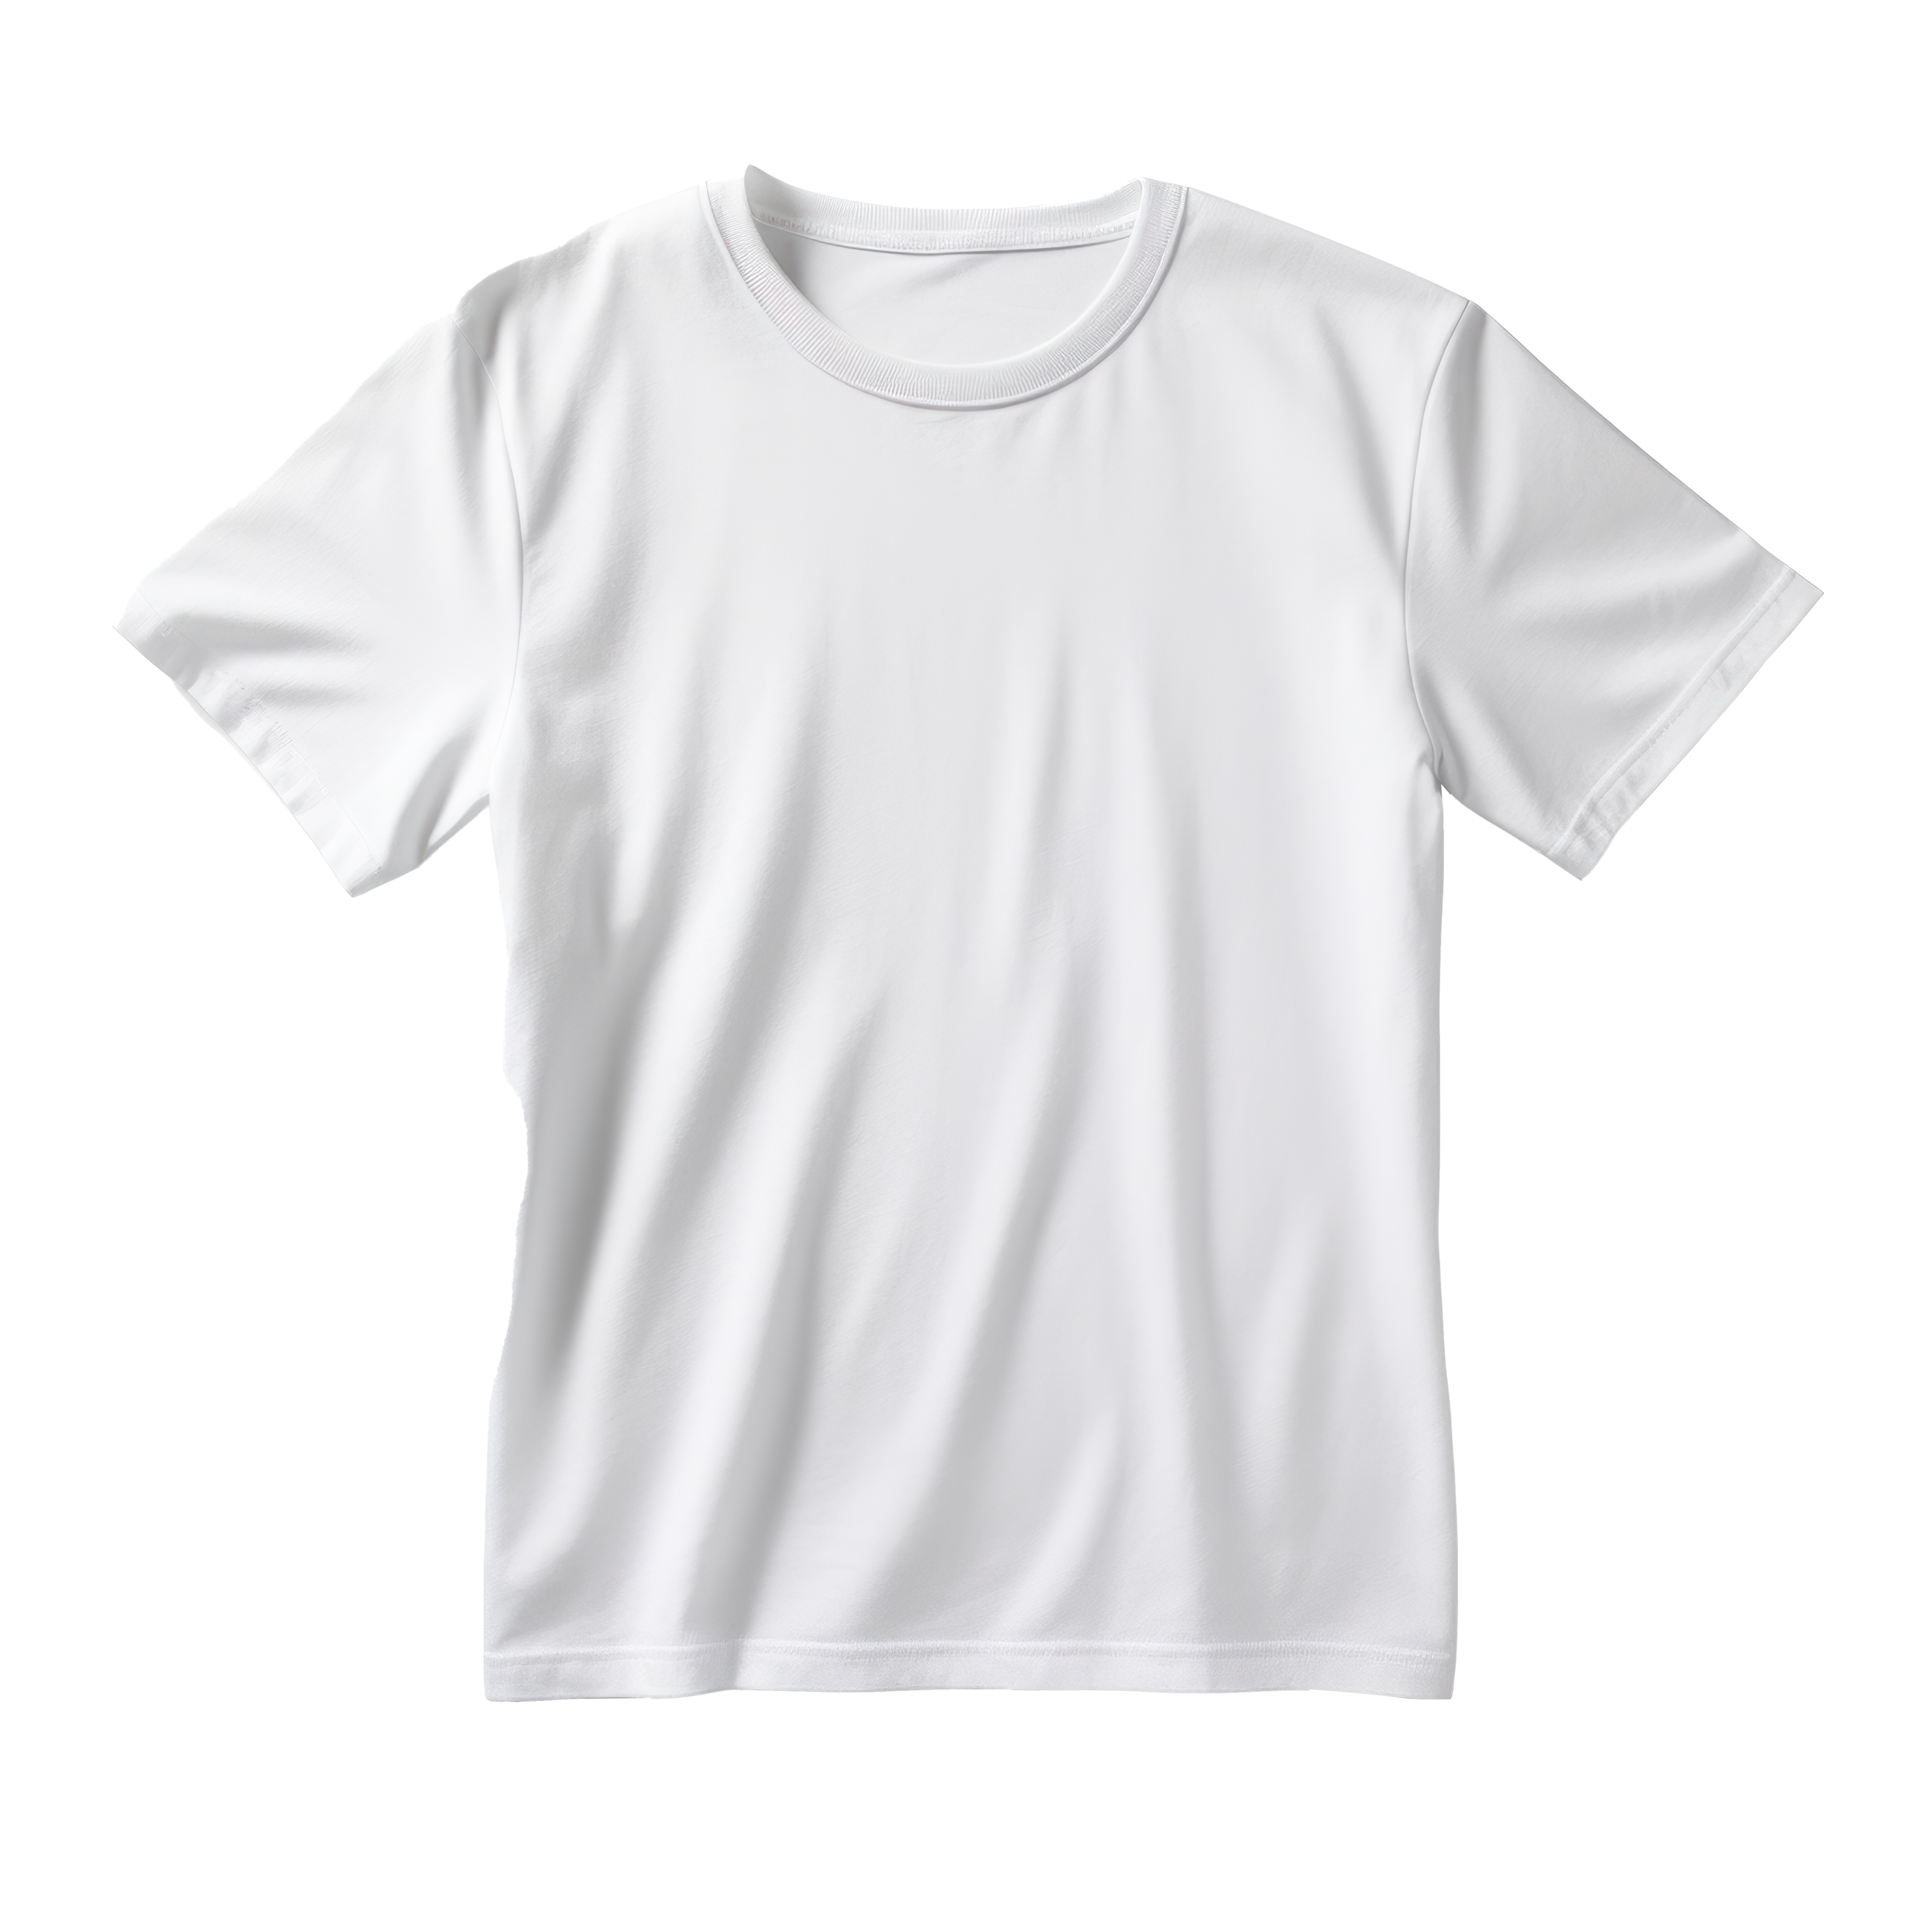 White T-Shirt Mockup Isolated 26431599 PNG